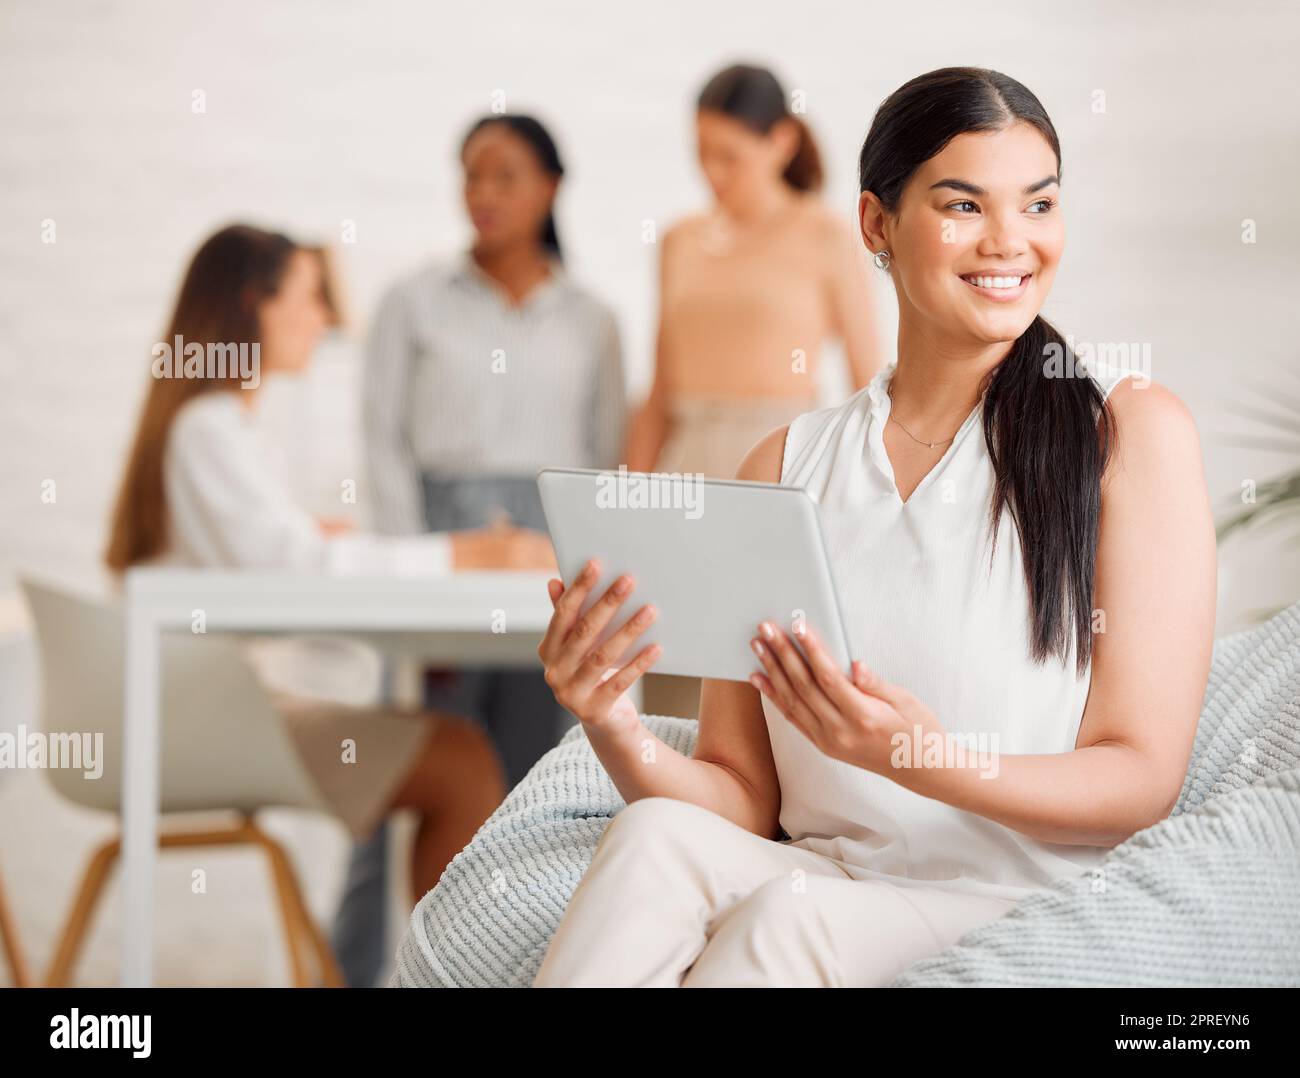 Trendy, fashionable and elegant fashion designer working on clothing designs on a digital tablet. Group of young, creative and professional stylists using teamwork and collaboration for new ideas Stock Photo